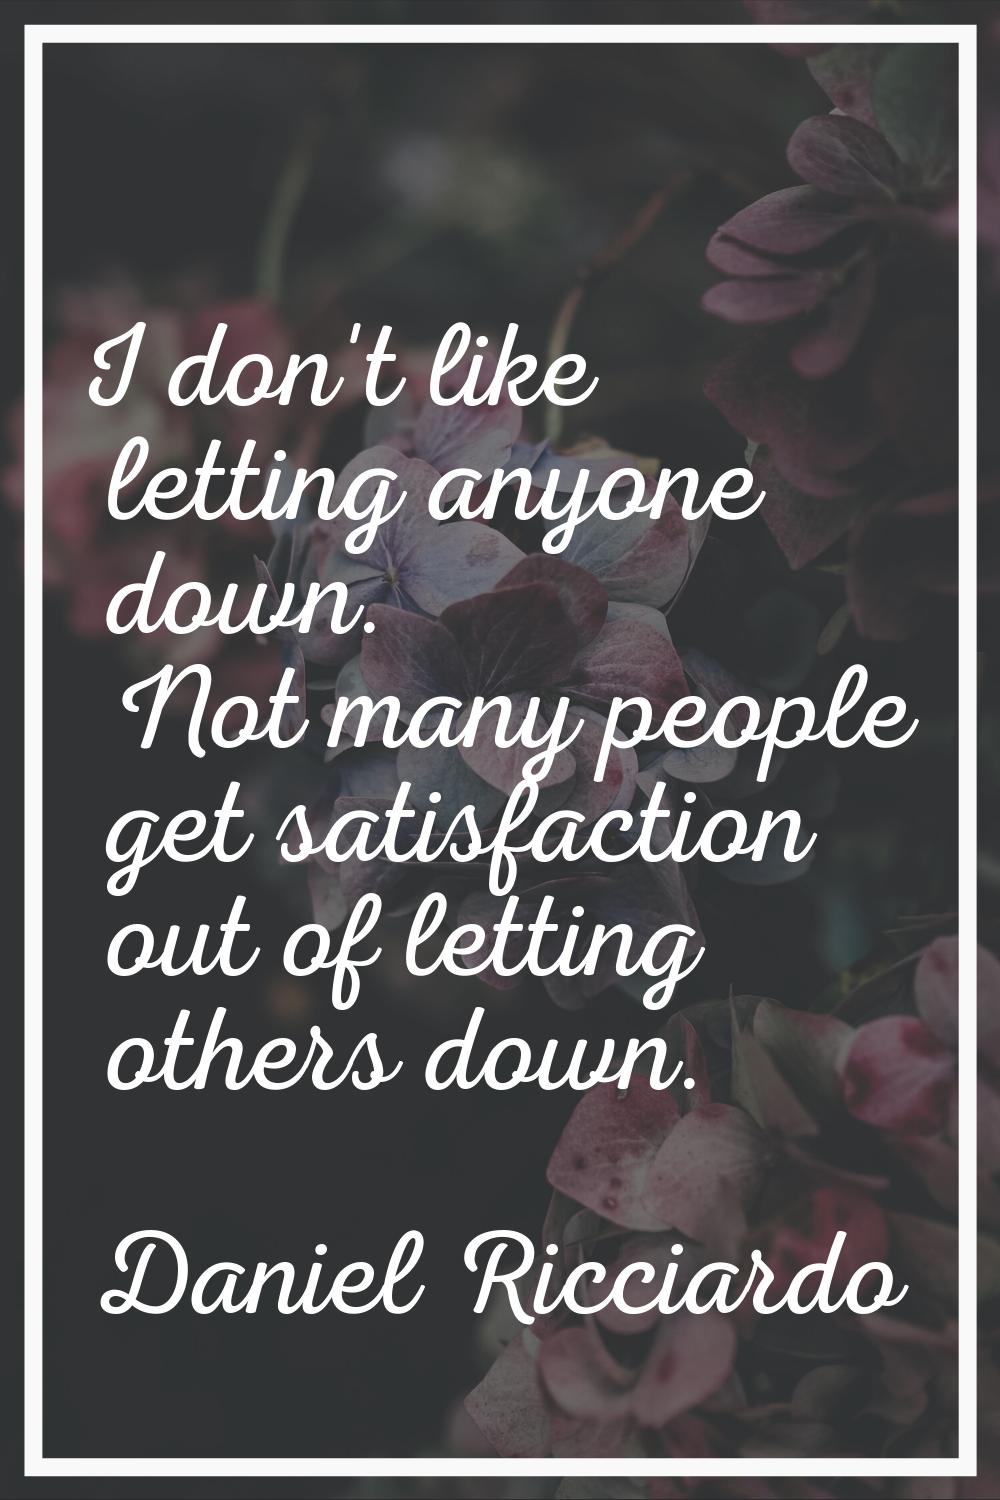 I don't like letting anyone down. Not many people get satisfaction out of letting others down.